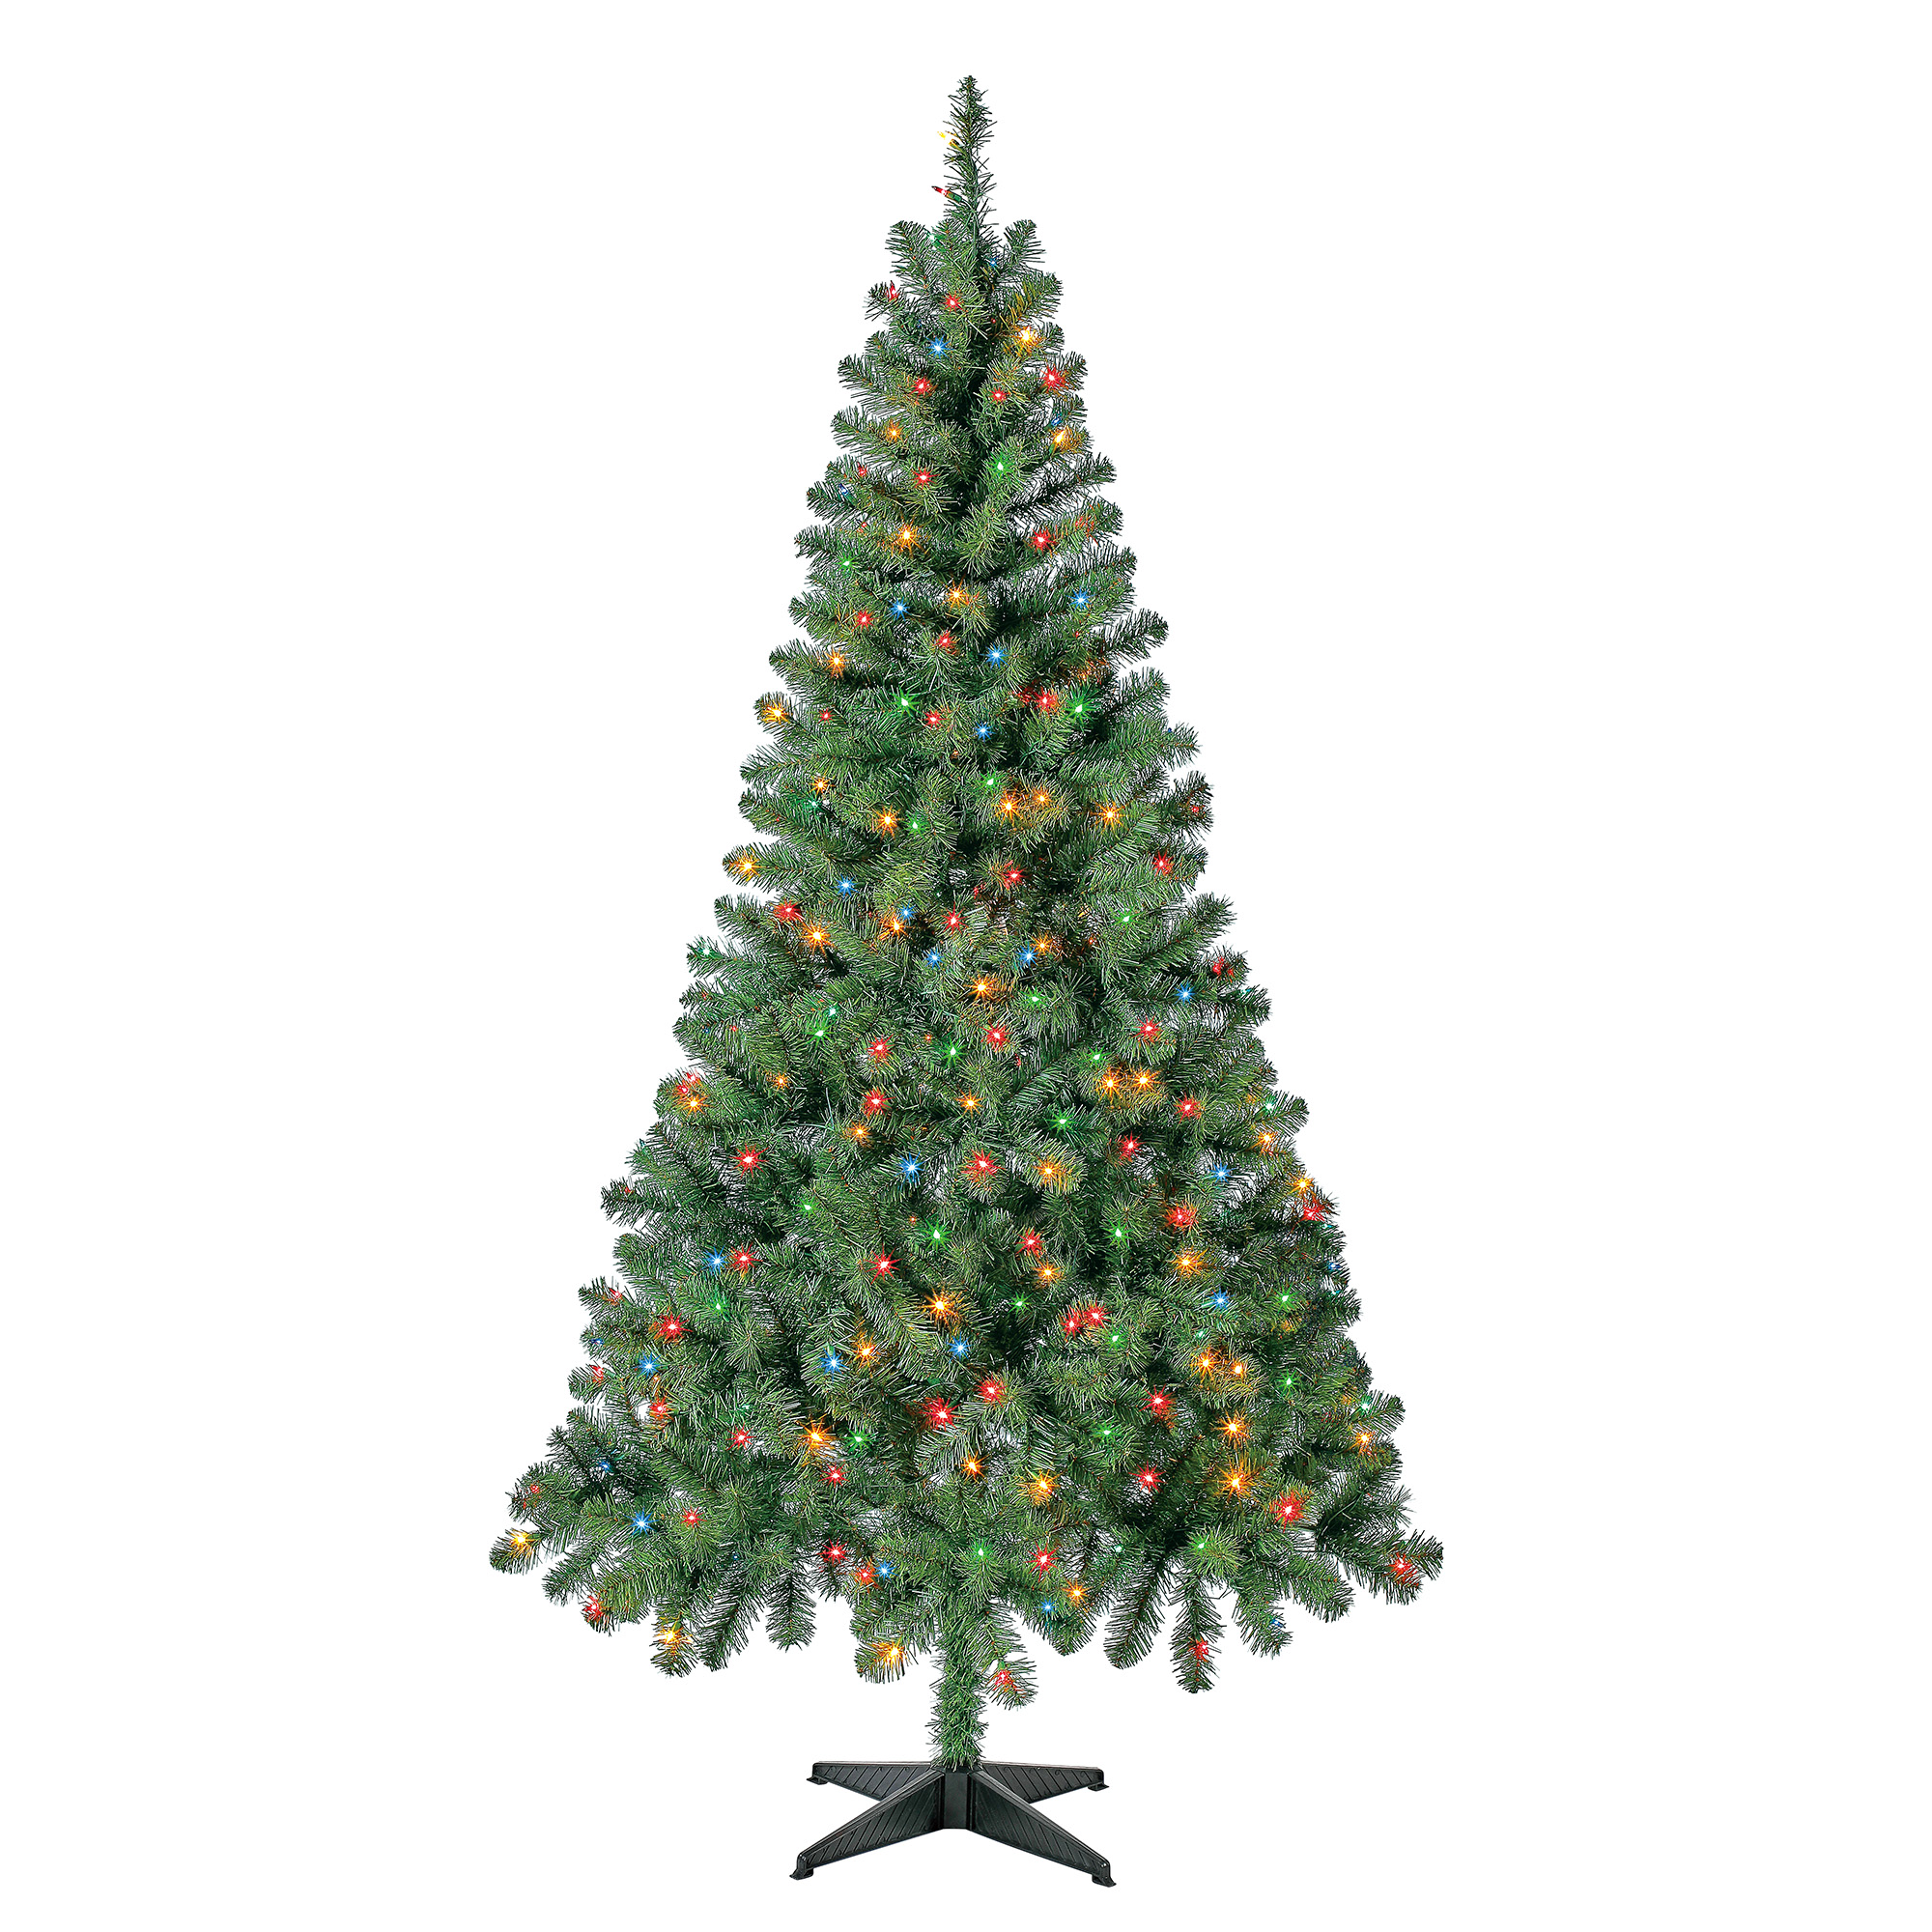 Holiday Time Prelit 300 Multicolor Incandescent Lights, Madison Pine Artificial Christmas Tree, 6.5' - image 1 of 7